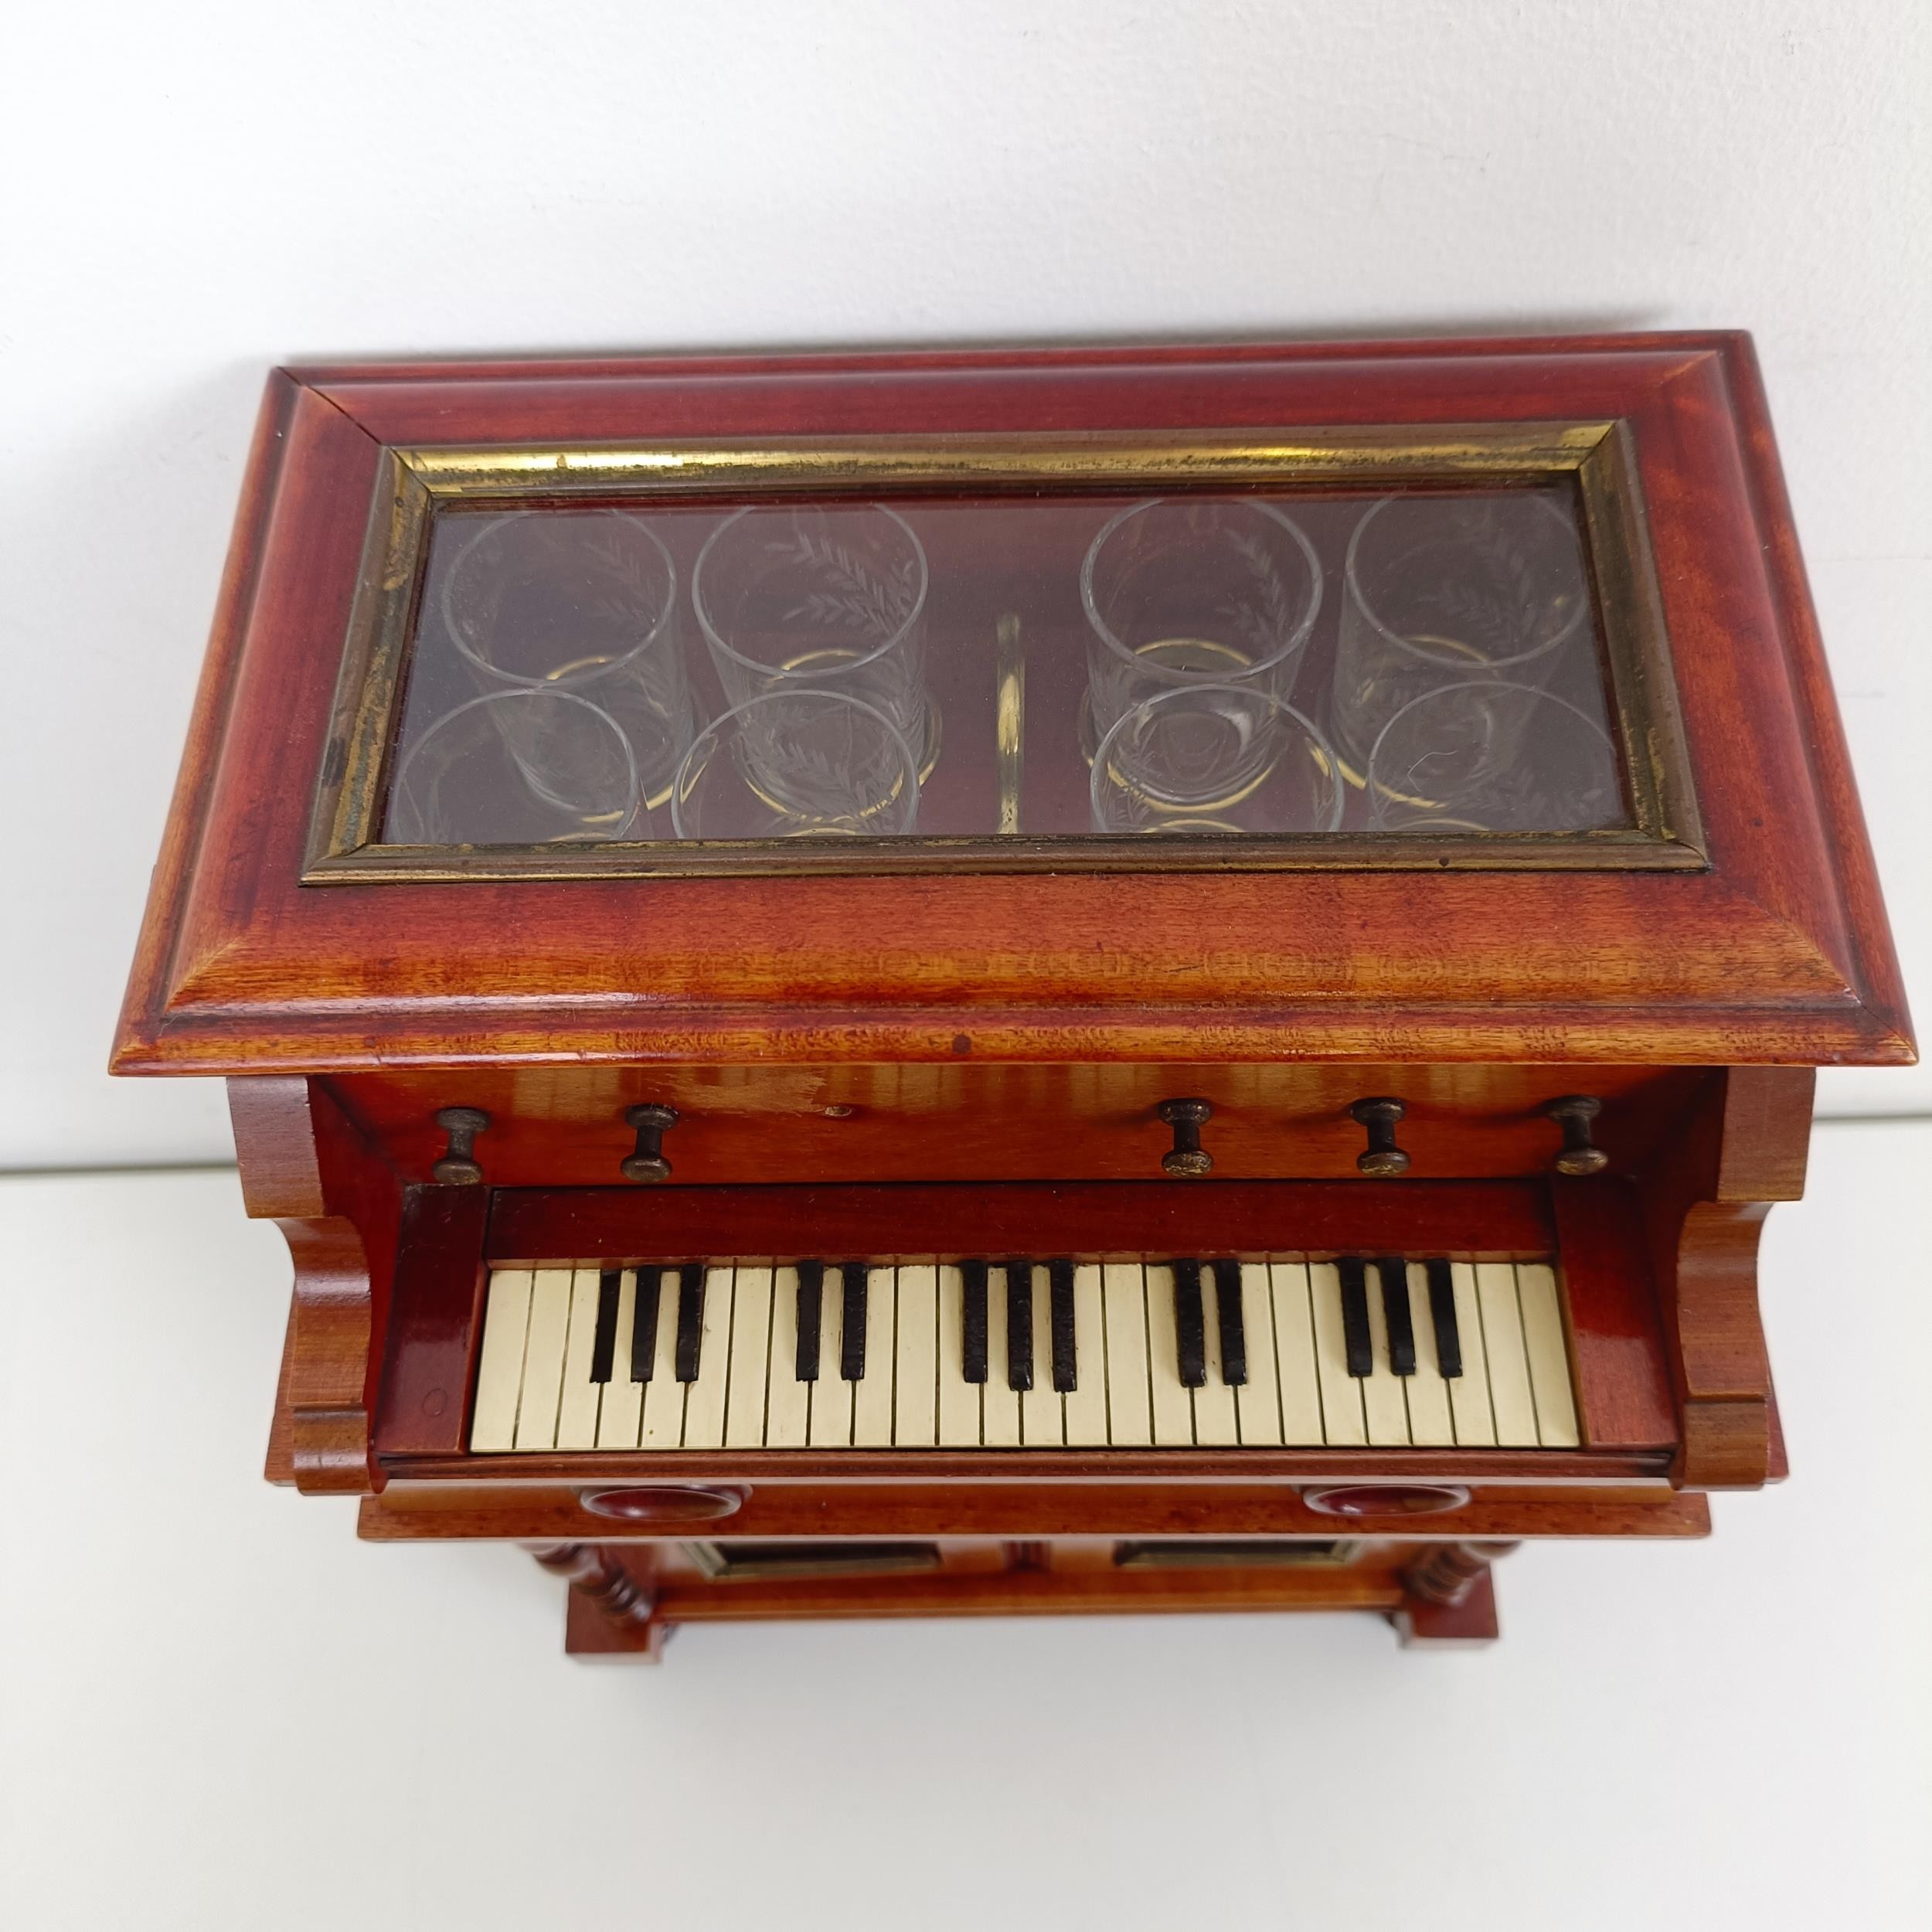 An early 20th century Continental musical tantalus/liqueur cabinet, in the form of a piano or organ, - Image 2 of 7